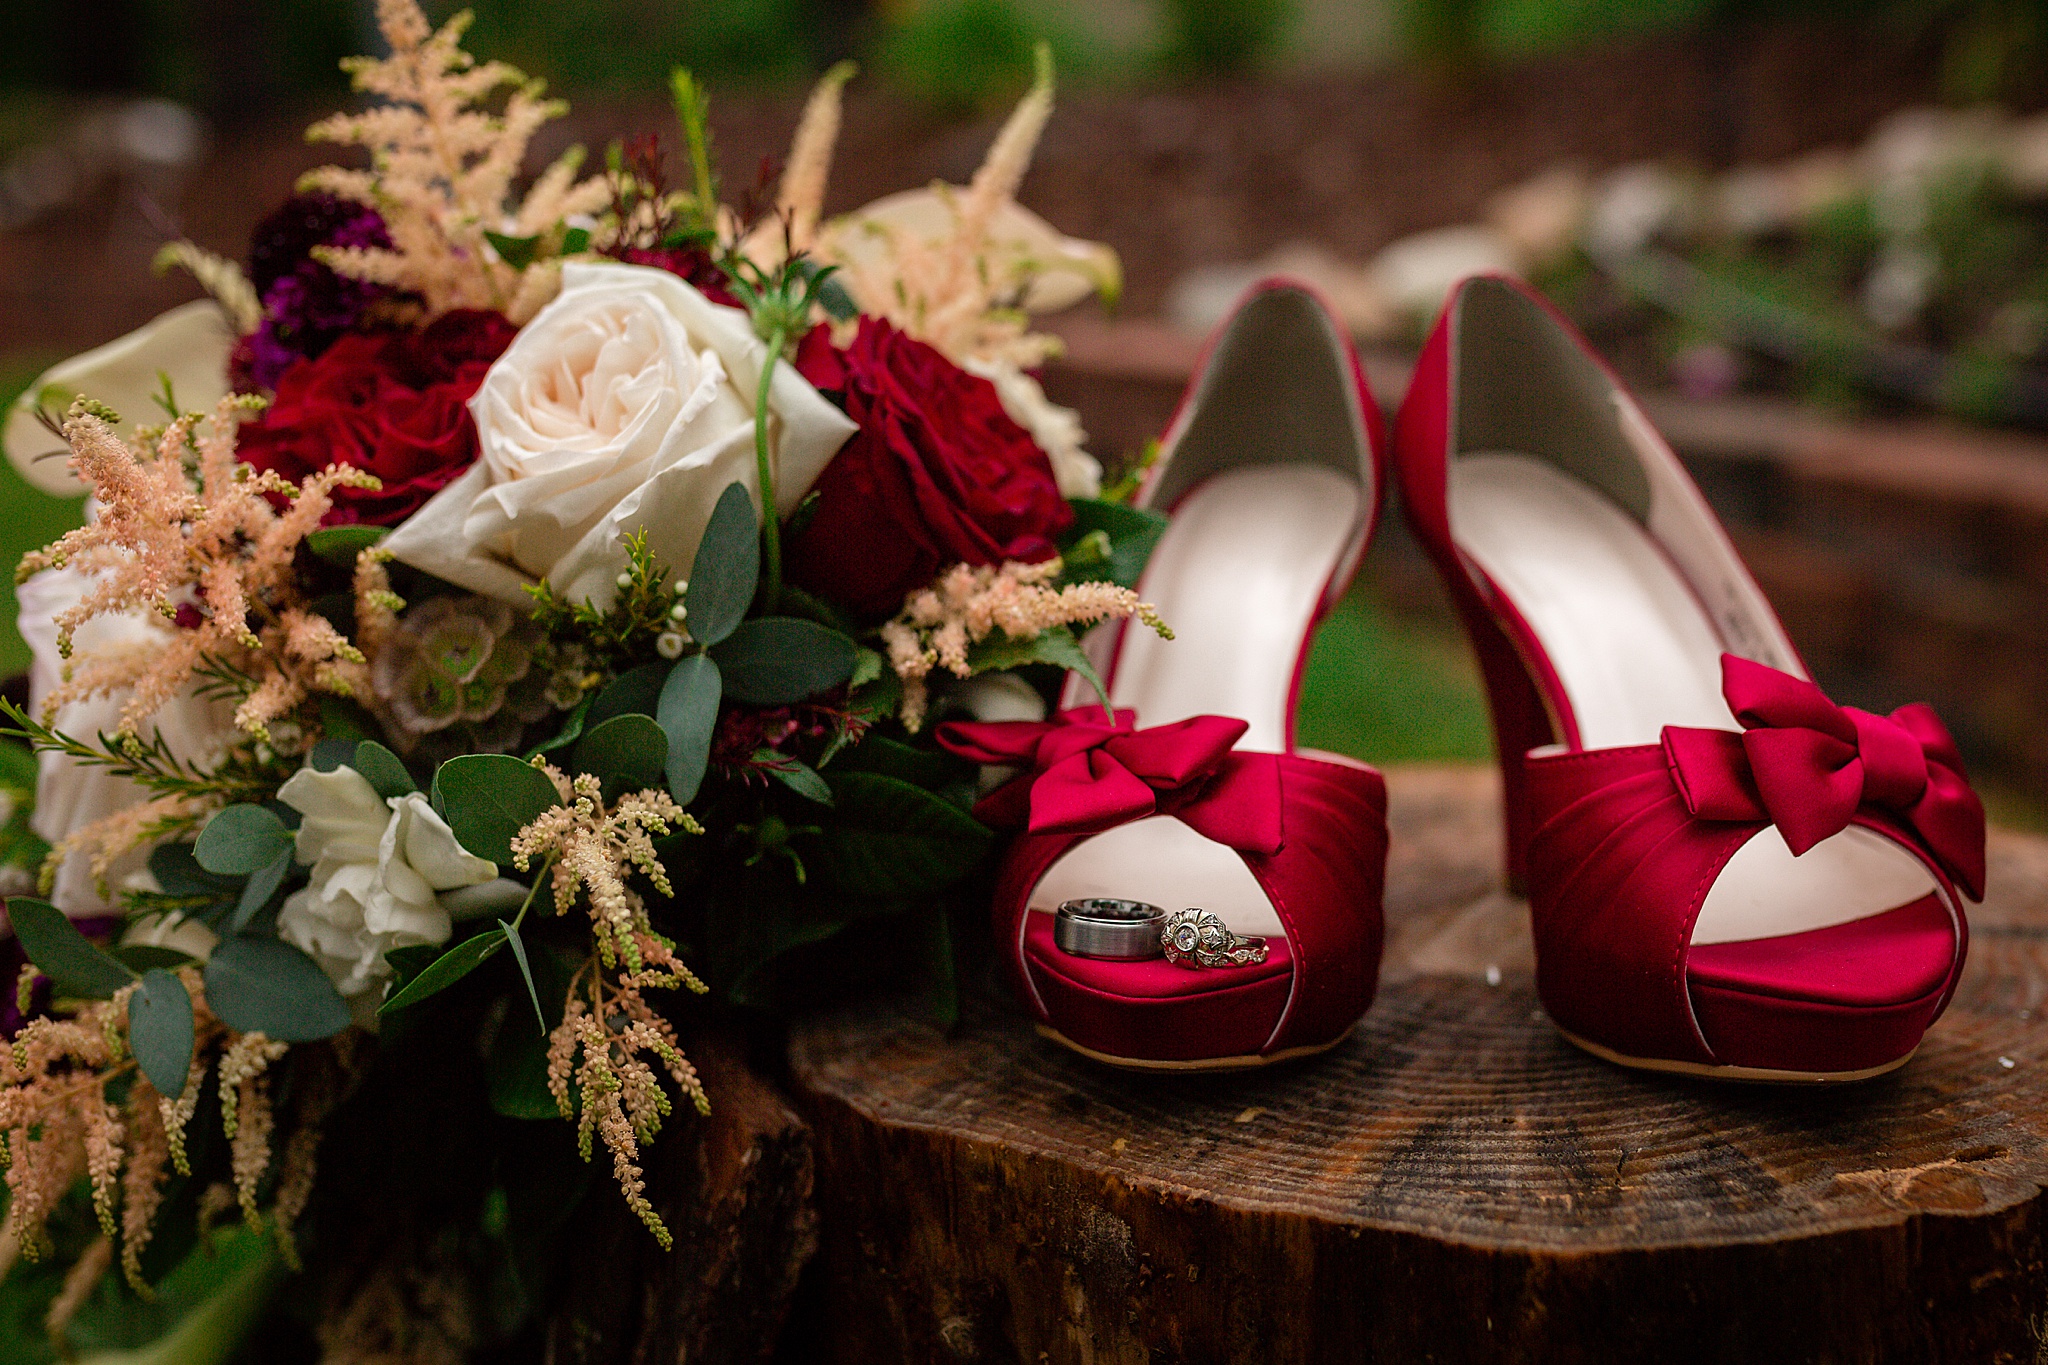 Close-up photo of wedding rings, red high heels, and bridal bouquet. Tania & Chris' Denver Wedding at the Wedgewood Ken Caryl by Colorado Wedding Photography, Jennifer Garza. Colorado Wedding Photographer, Colorado Wedding Photography, Denver Wedding Photographer, Denver Wedding Photography, US Marine Corp Wedding, US Marine Corp, Military Wedding, US Marines, Wedgewood Weddings, Wedgewood Weddings Ken Caryl, Colorado Wedding, Denver Wedding, Wedding Photographer, Colorado Bride